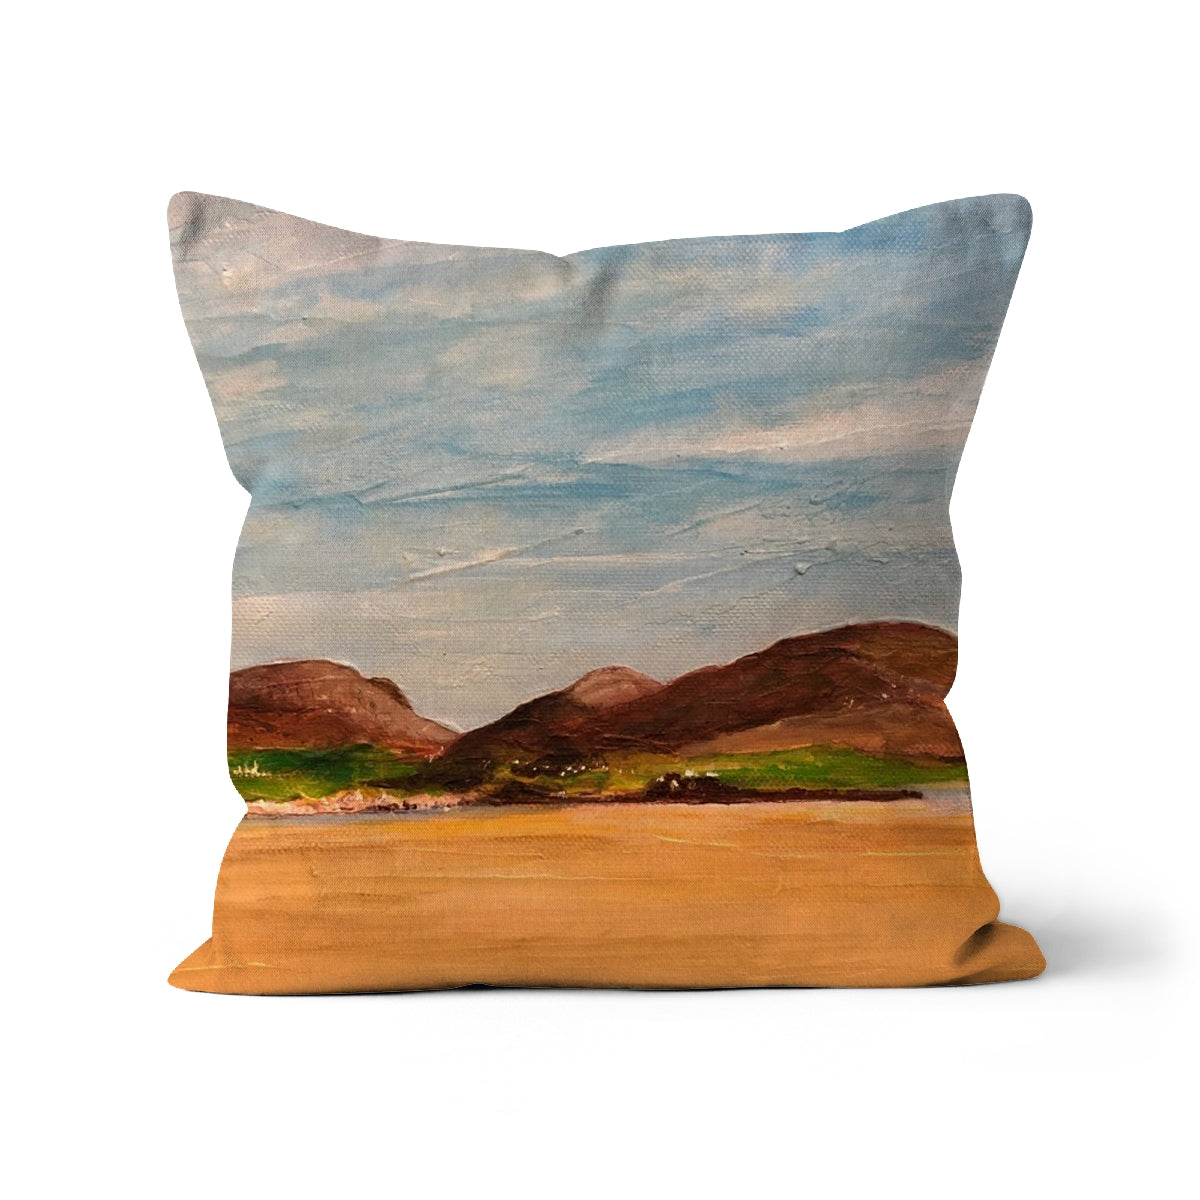 Uig Sands Lewis Art Gifts Cushion-Cushions-Hebridean Islands Art Gallery-Linen-18"x18"-Paintings, Prints, Homeware, Art Gifts From Scotland By Scottish Artist Kevin Hunter